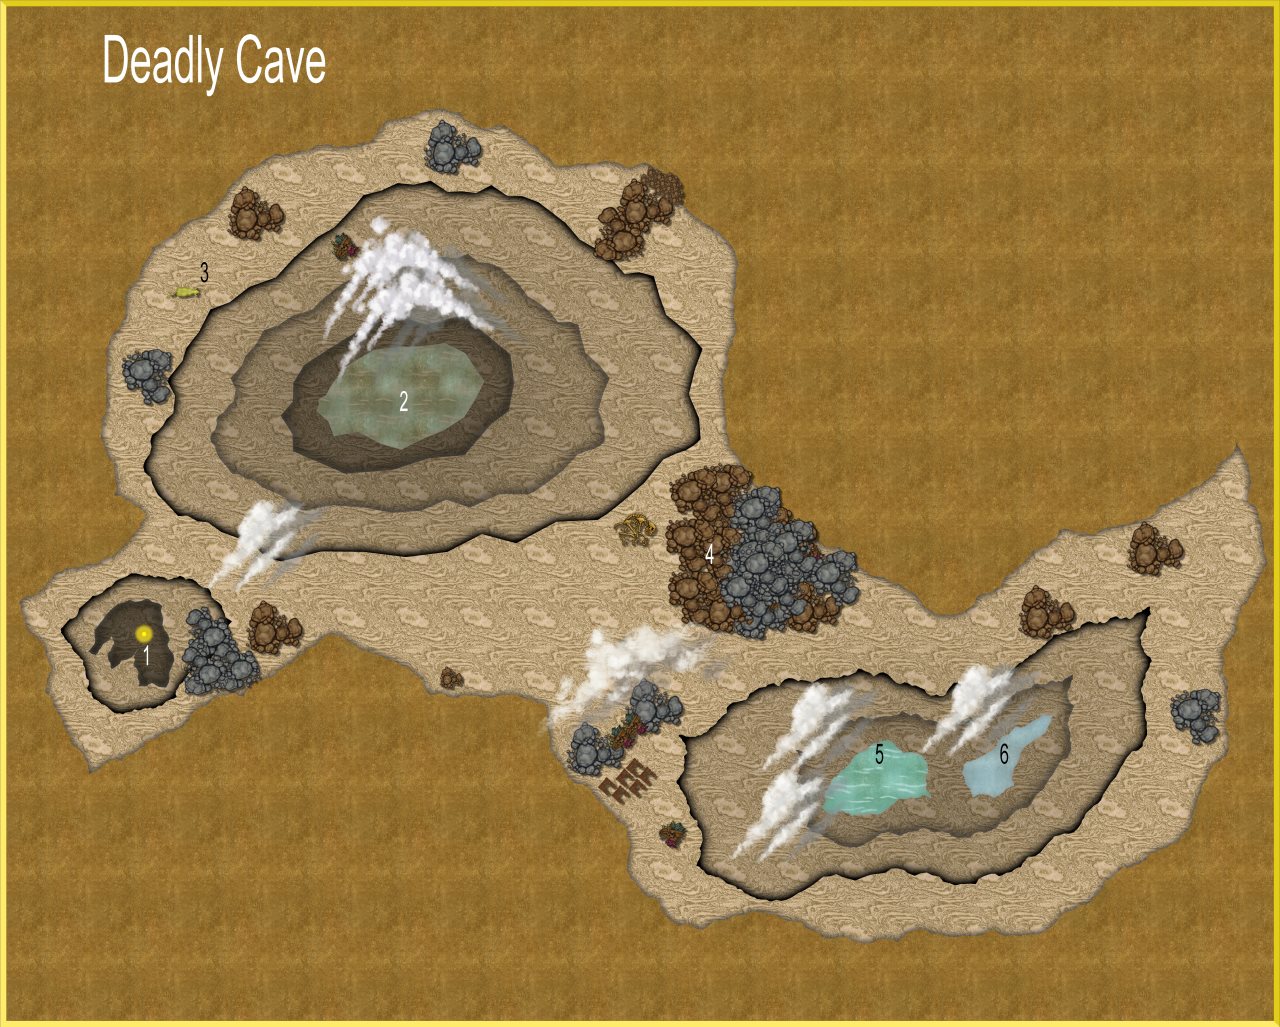 Nibirum Map: rorial halls deadly cave by JimP